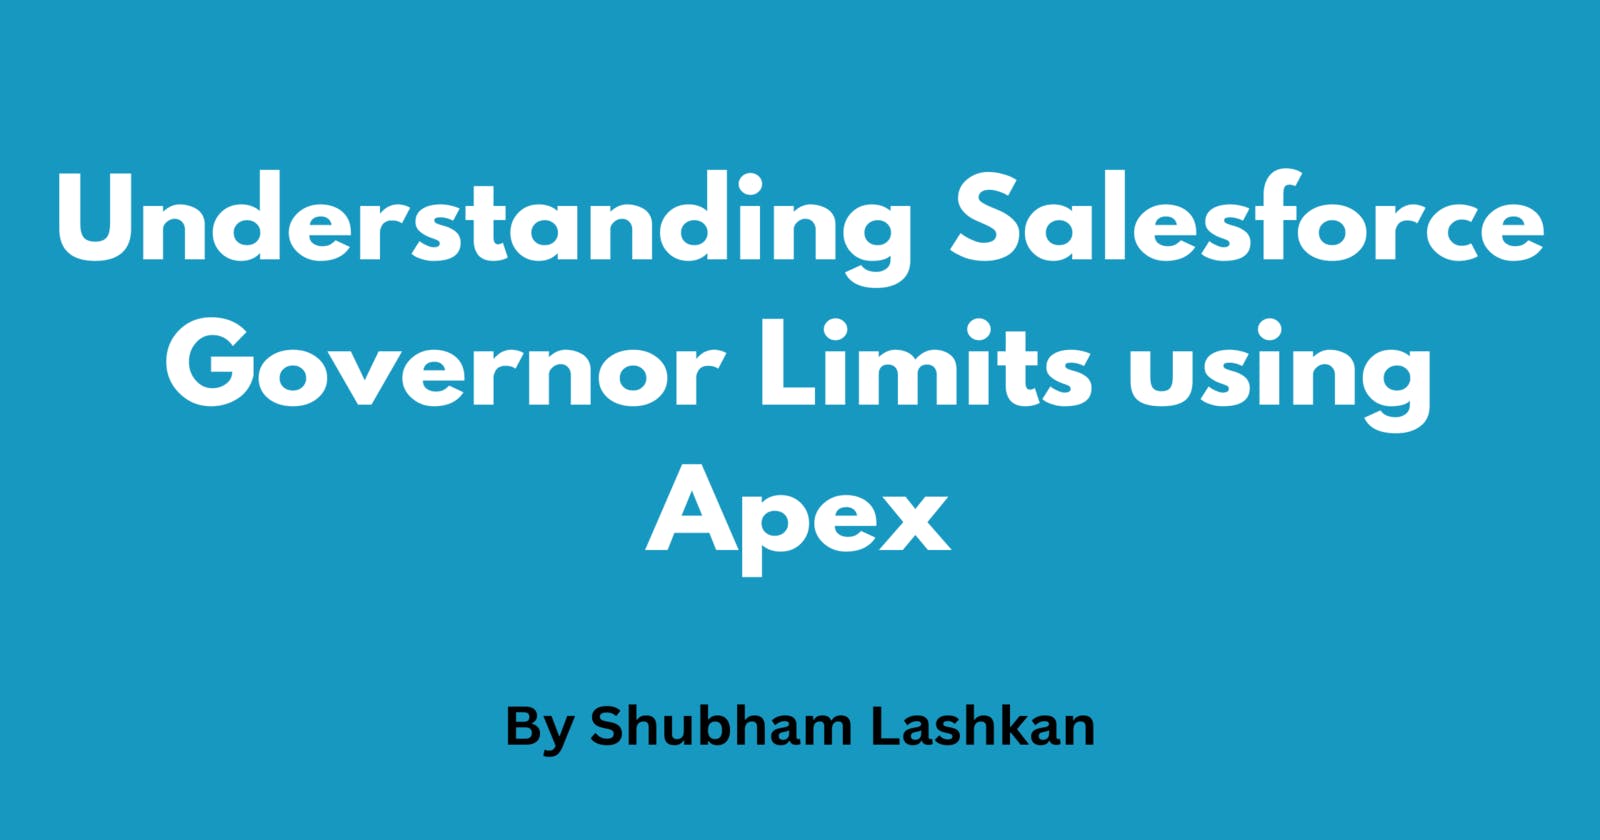 What are Governor Limits in Salesforce?